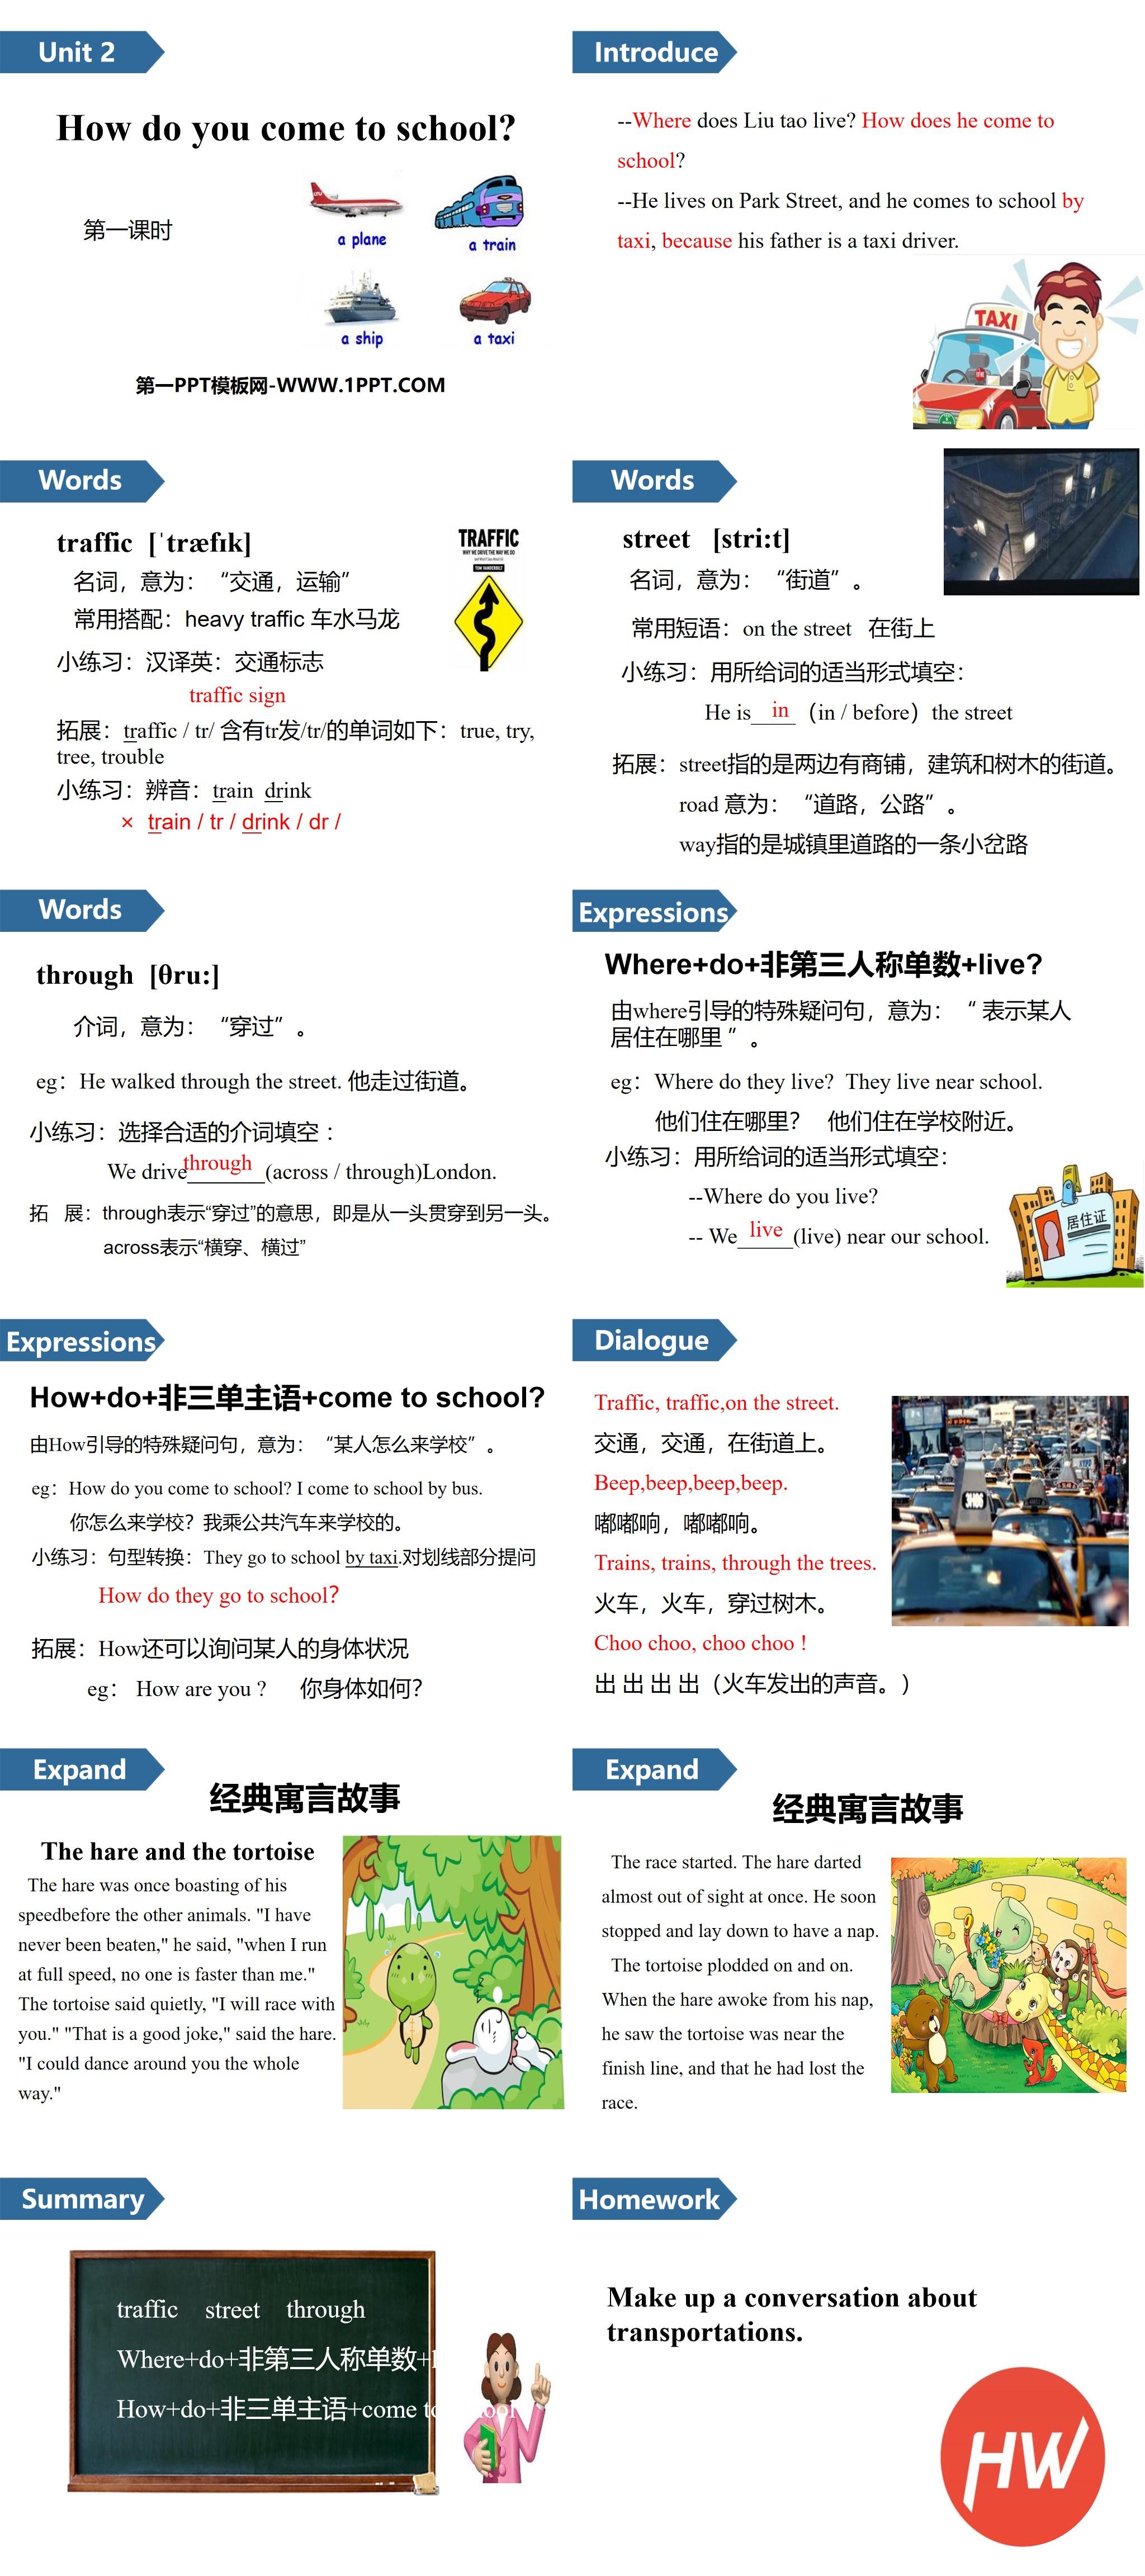 《How do you come to school?》PPT(第一课时)
（2）